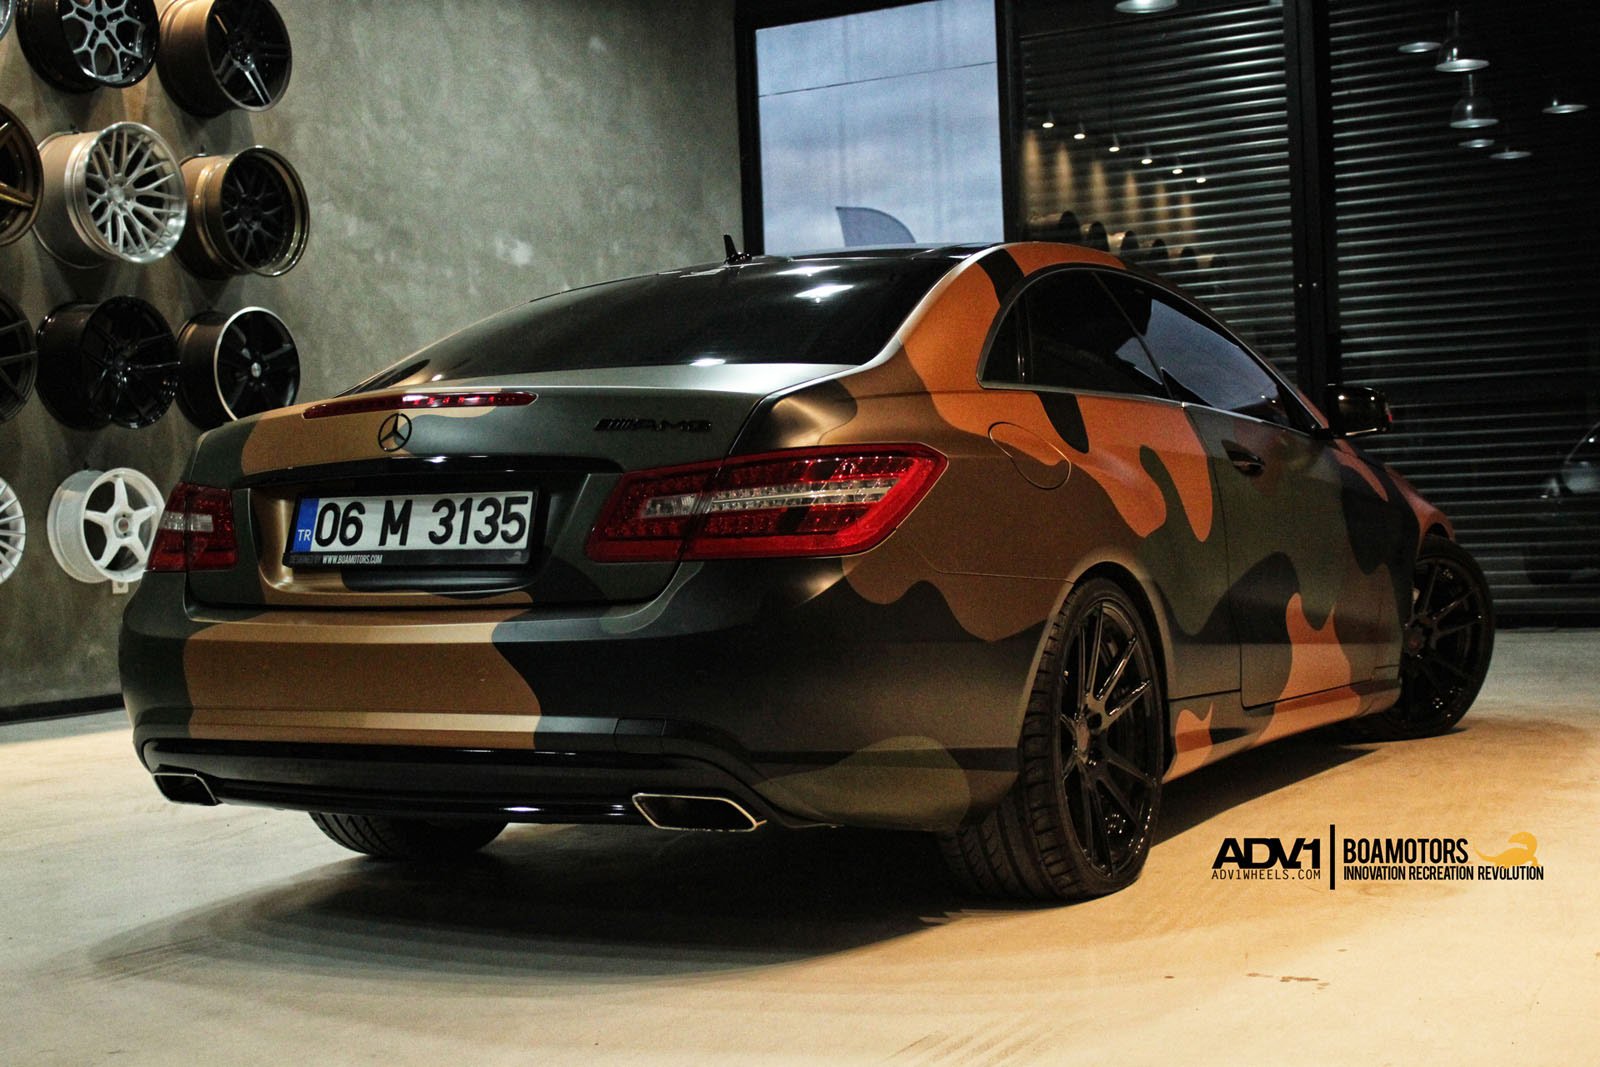 adv1, Wheels, Mercedes, E class, Coupe, Wrapping, Tuning, Car Wallpaper